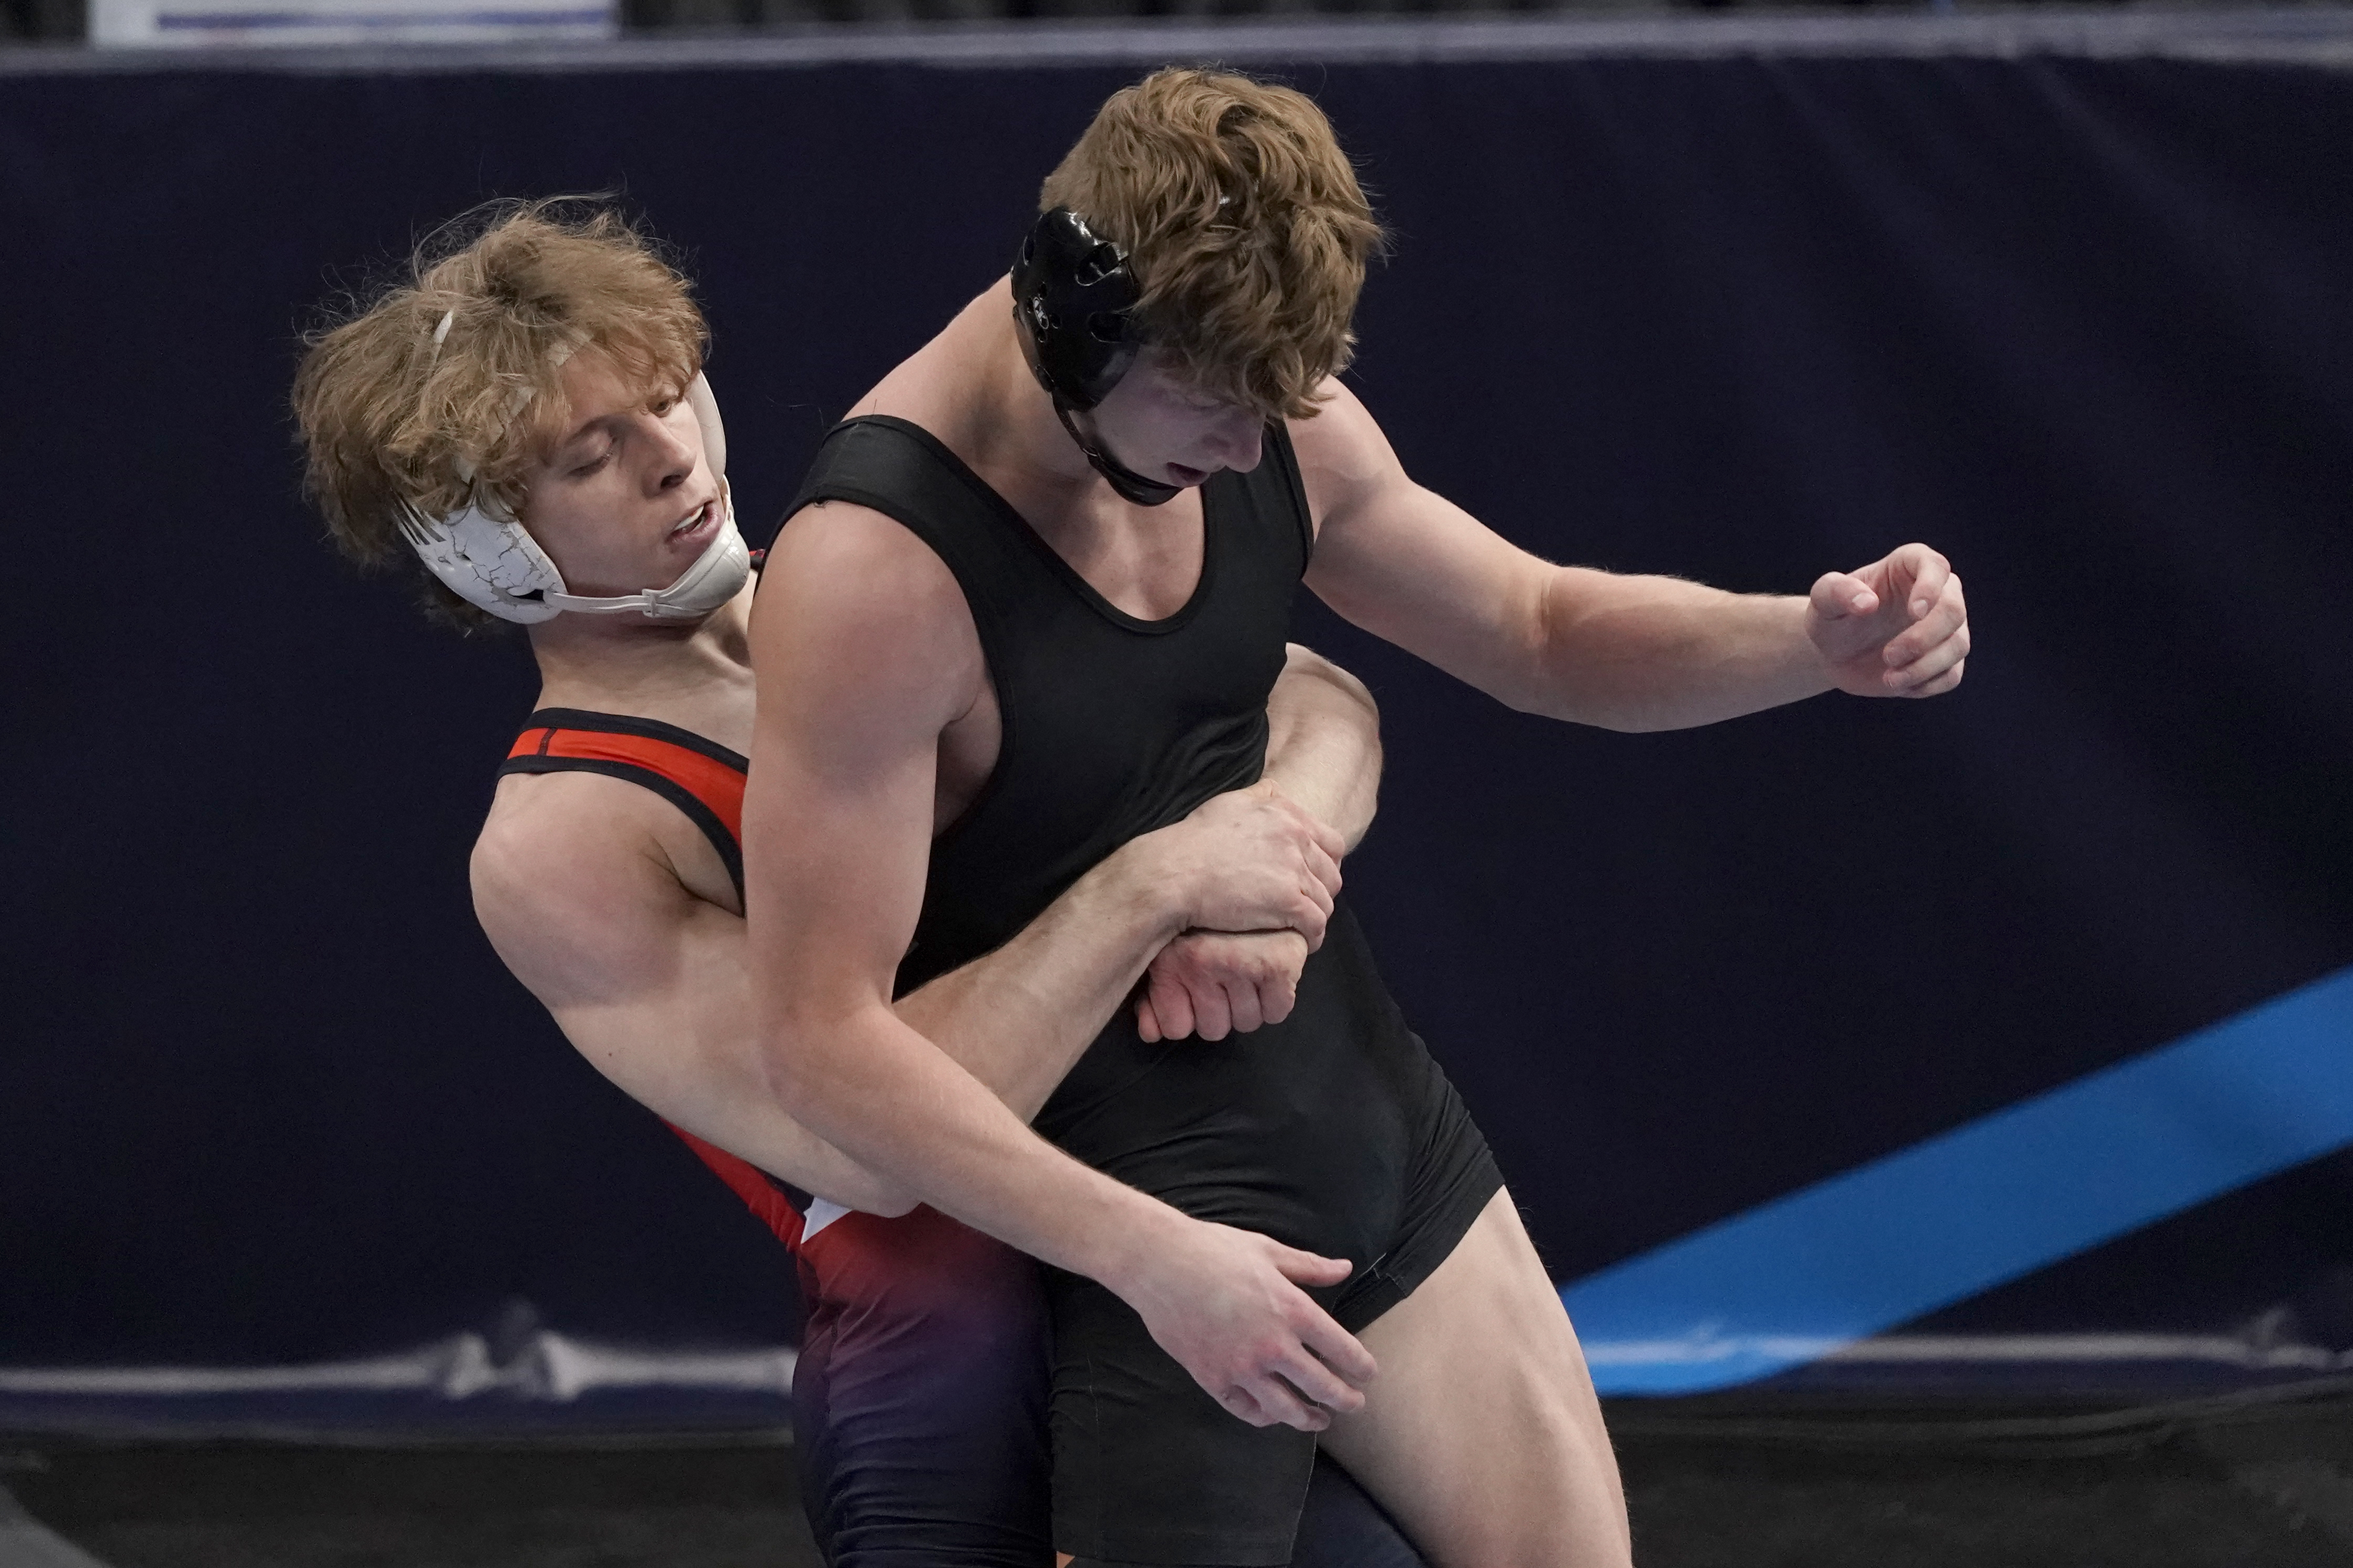 How to LIVE STREAM FREE the championship round of the NCAA Wrestling Championships Saturday (3-20-21)